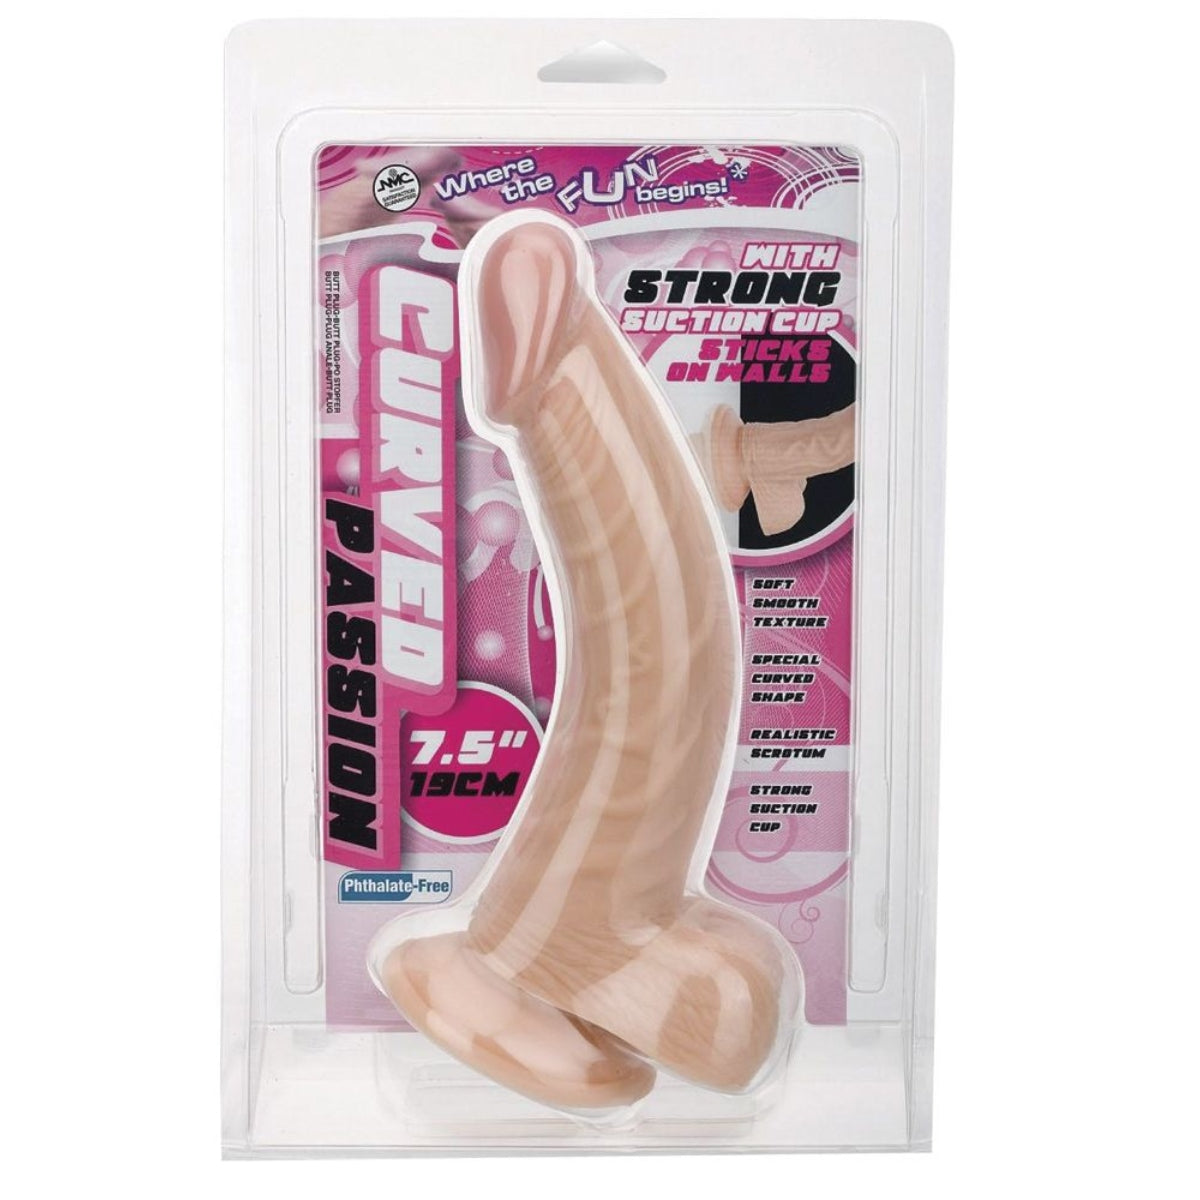 Nanma Curved Passion Suction Cup Dildo Pink 7.5 Inch